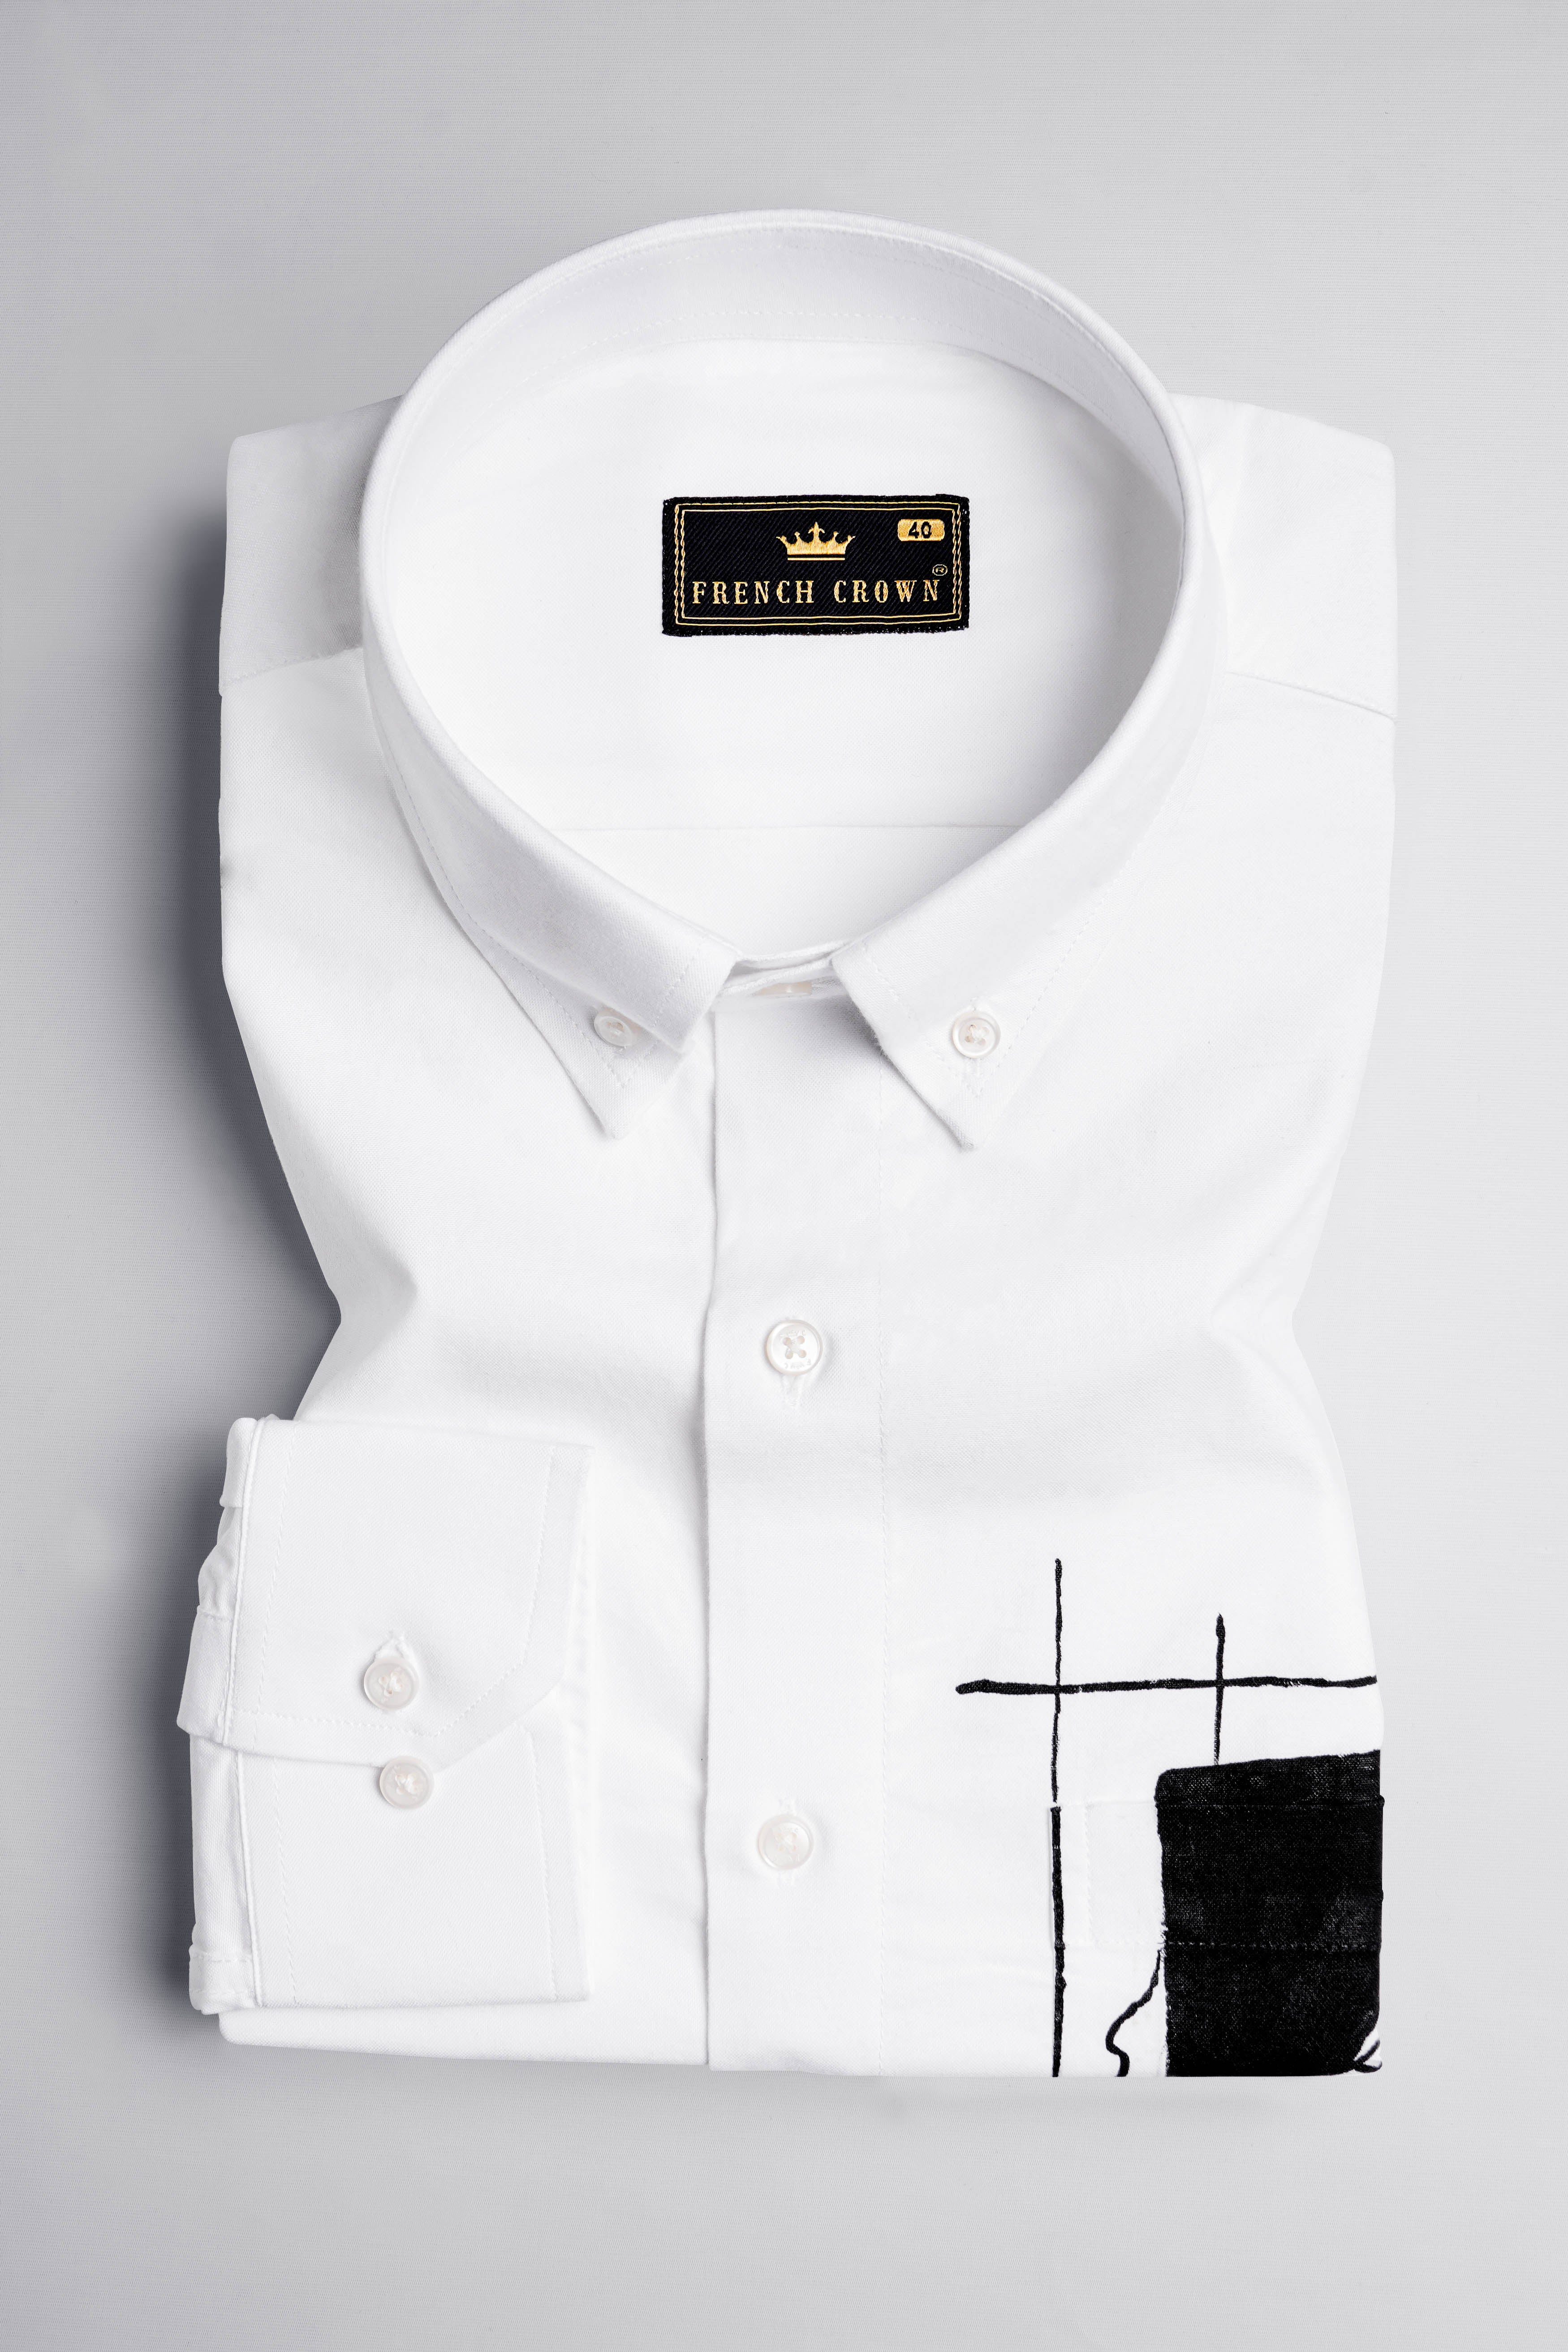 Bright White with Black Hand Painted Royal Oxford Designer Shirt